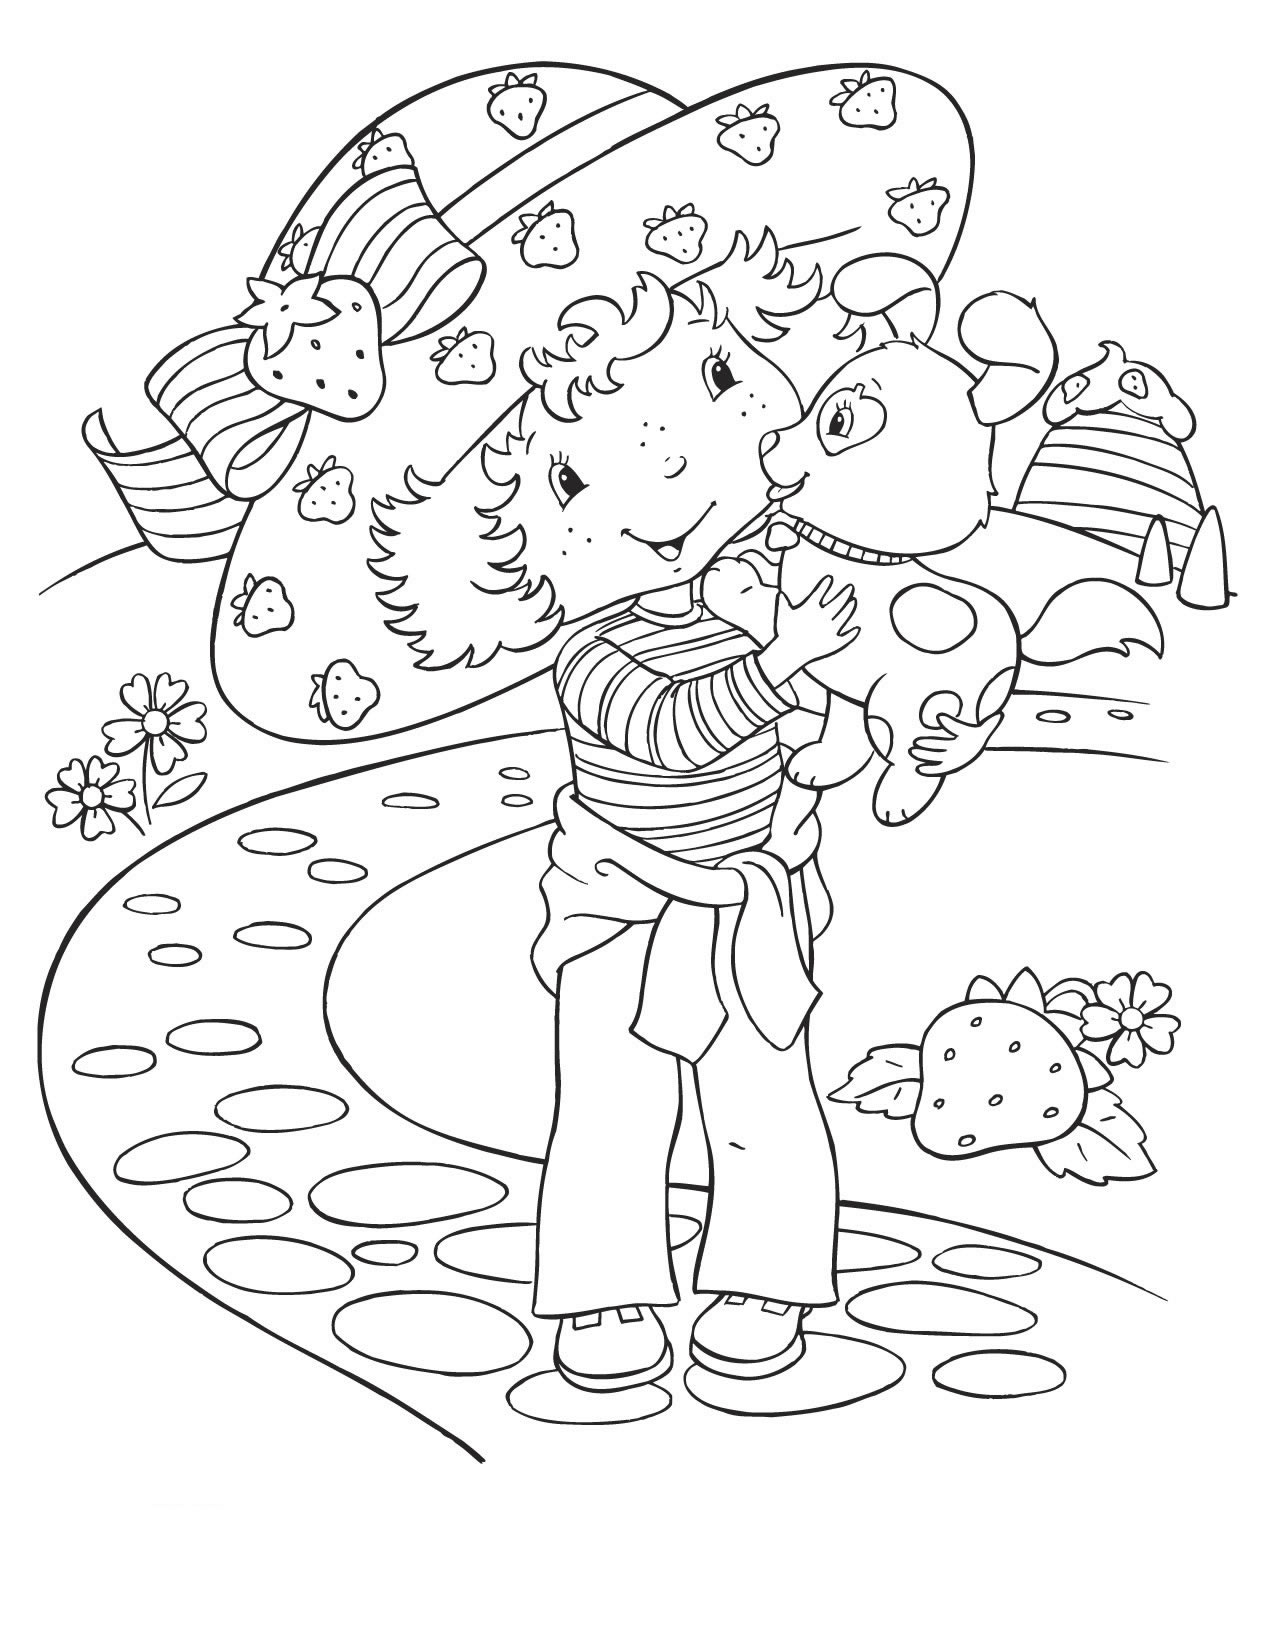 Strawberry Shortcake Coloring Pages Cool coloring pages 30